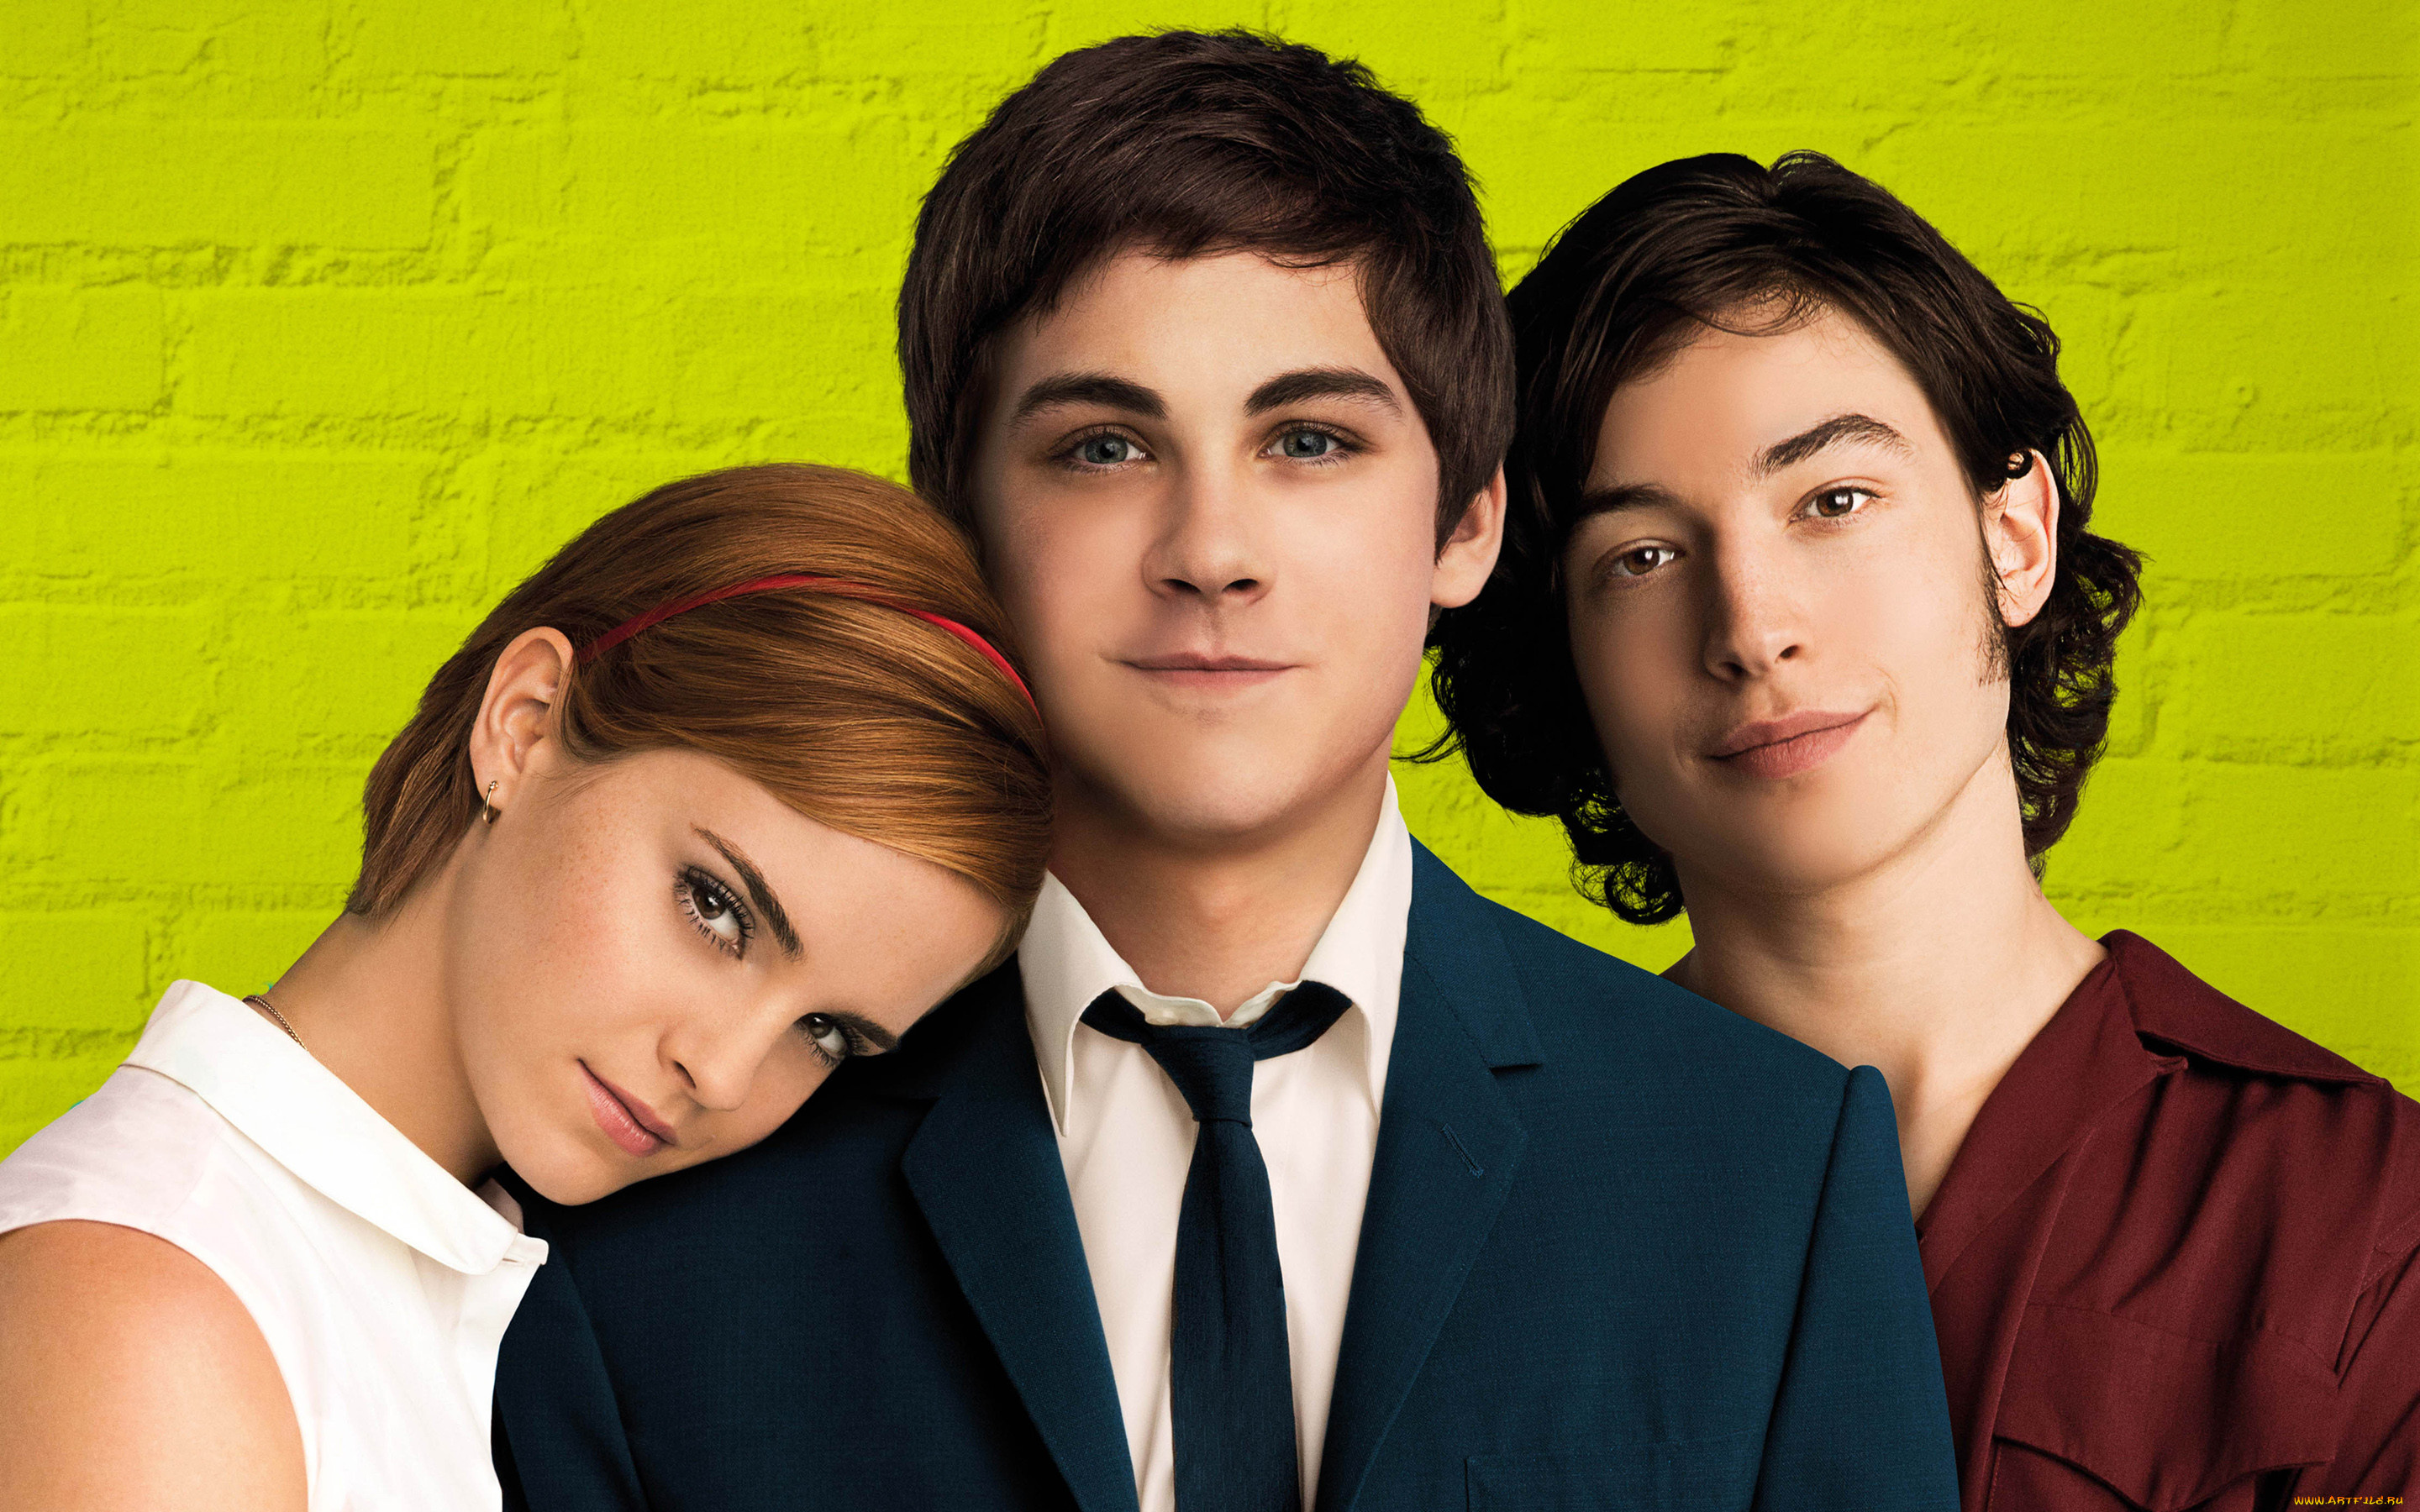   ,  , the perks of being a wallflower, , , , the, perks, of, being, a, wallflower